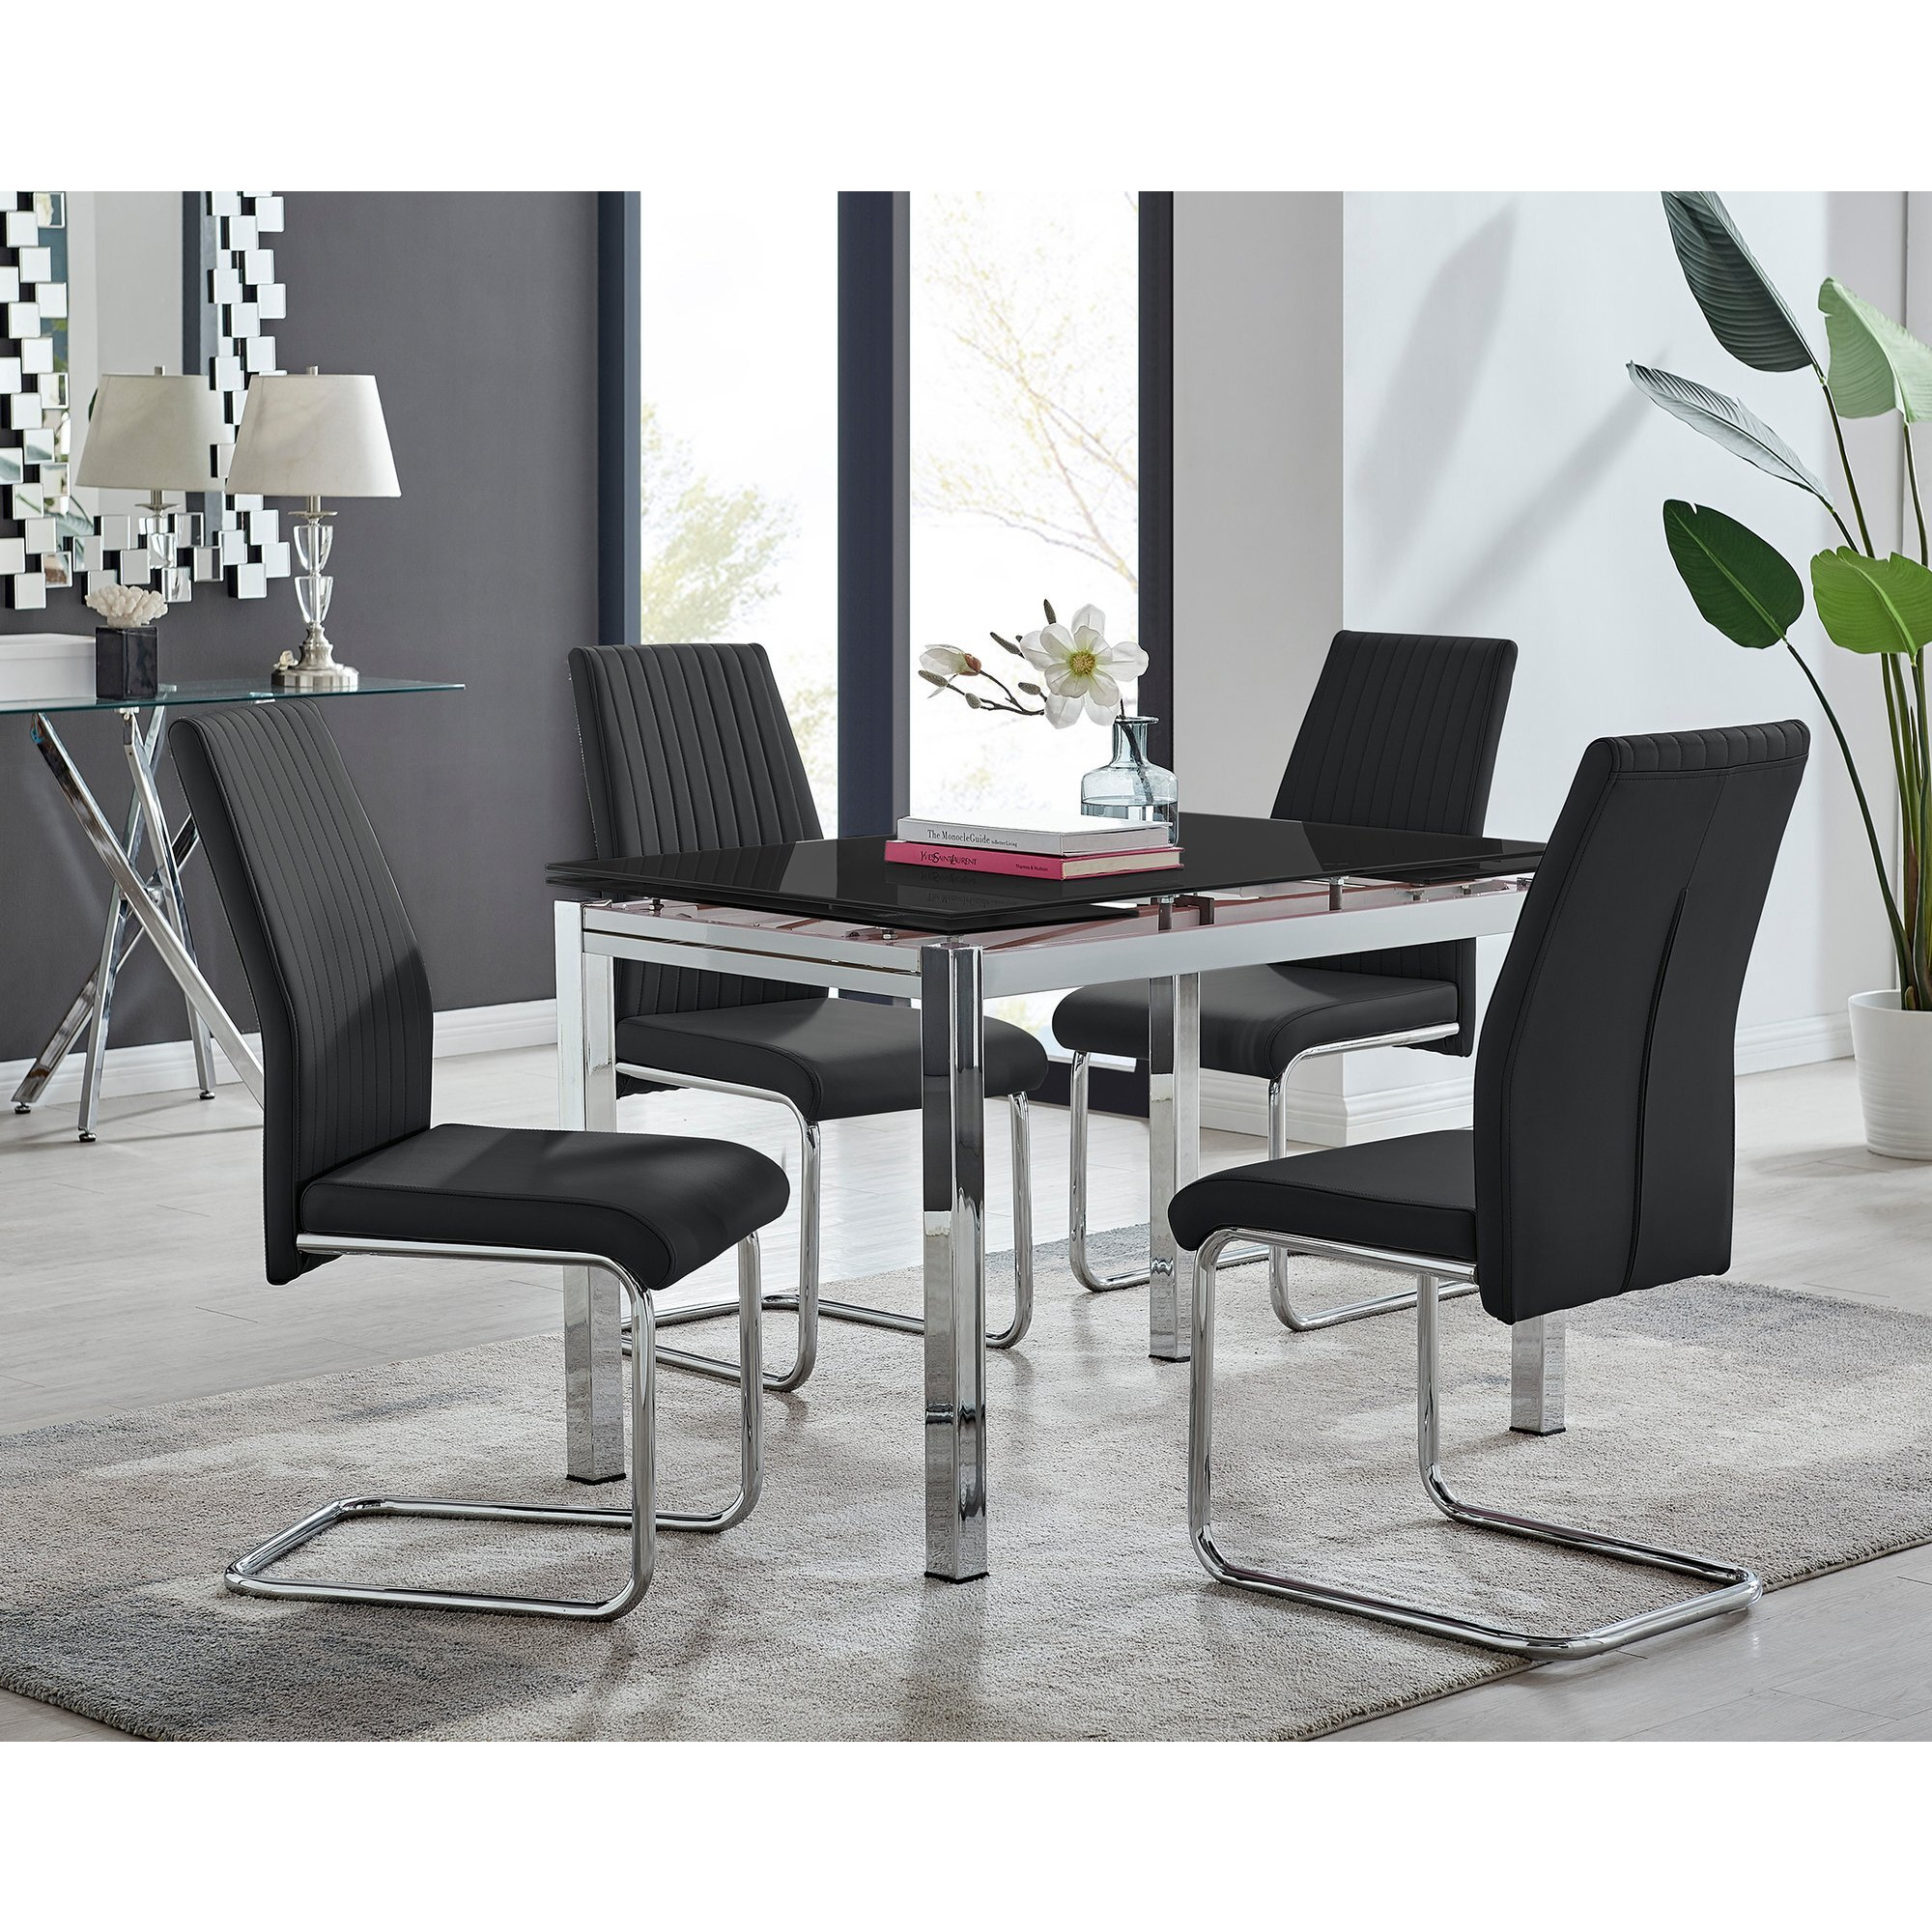 Enna Black Glass Extending Dining Table and 4 Lorenzo Chairs